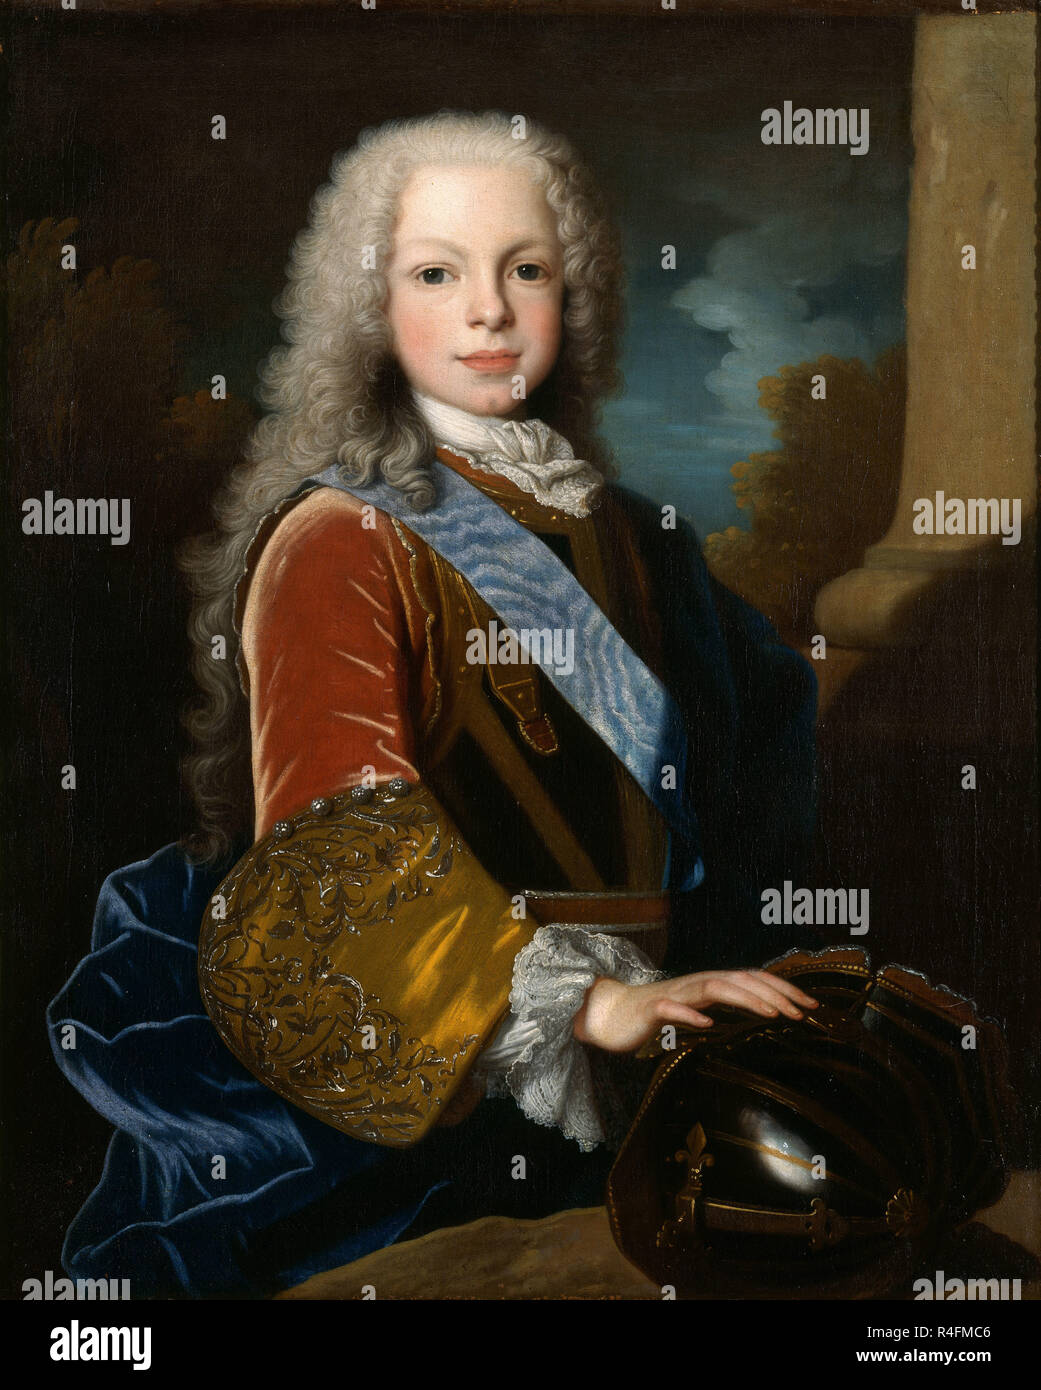 Portrait of Ferdinand de Bourbon and Savoy (1713-59) Prince of Asturias - 1725 - 75x62 cm - oil on canvas - French Baroque. Author: RANC, JEAN. Location: PRIVATE COLLECTION. MADRID. SPAIN. Stock Photo